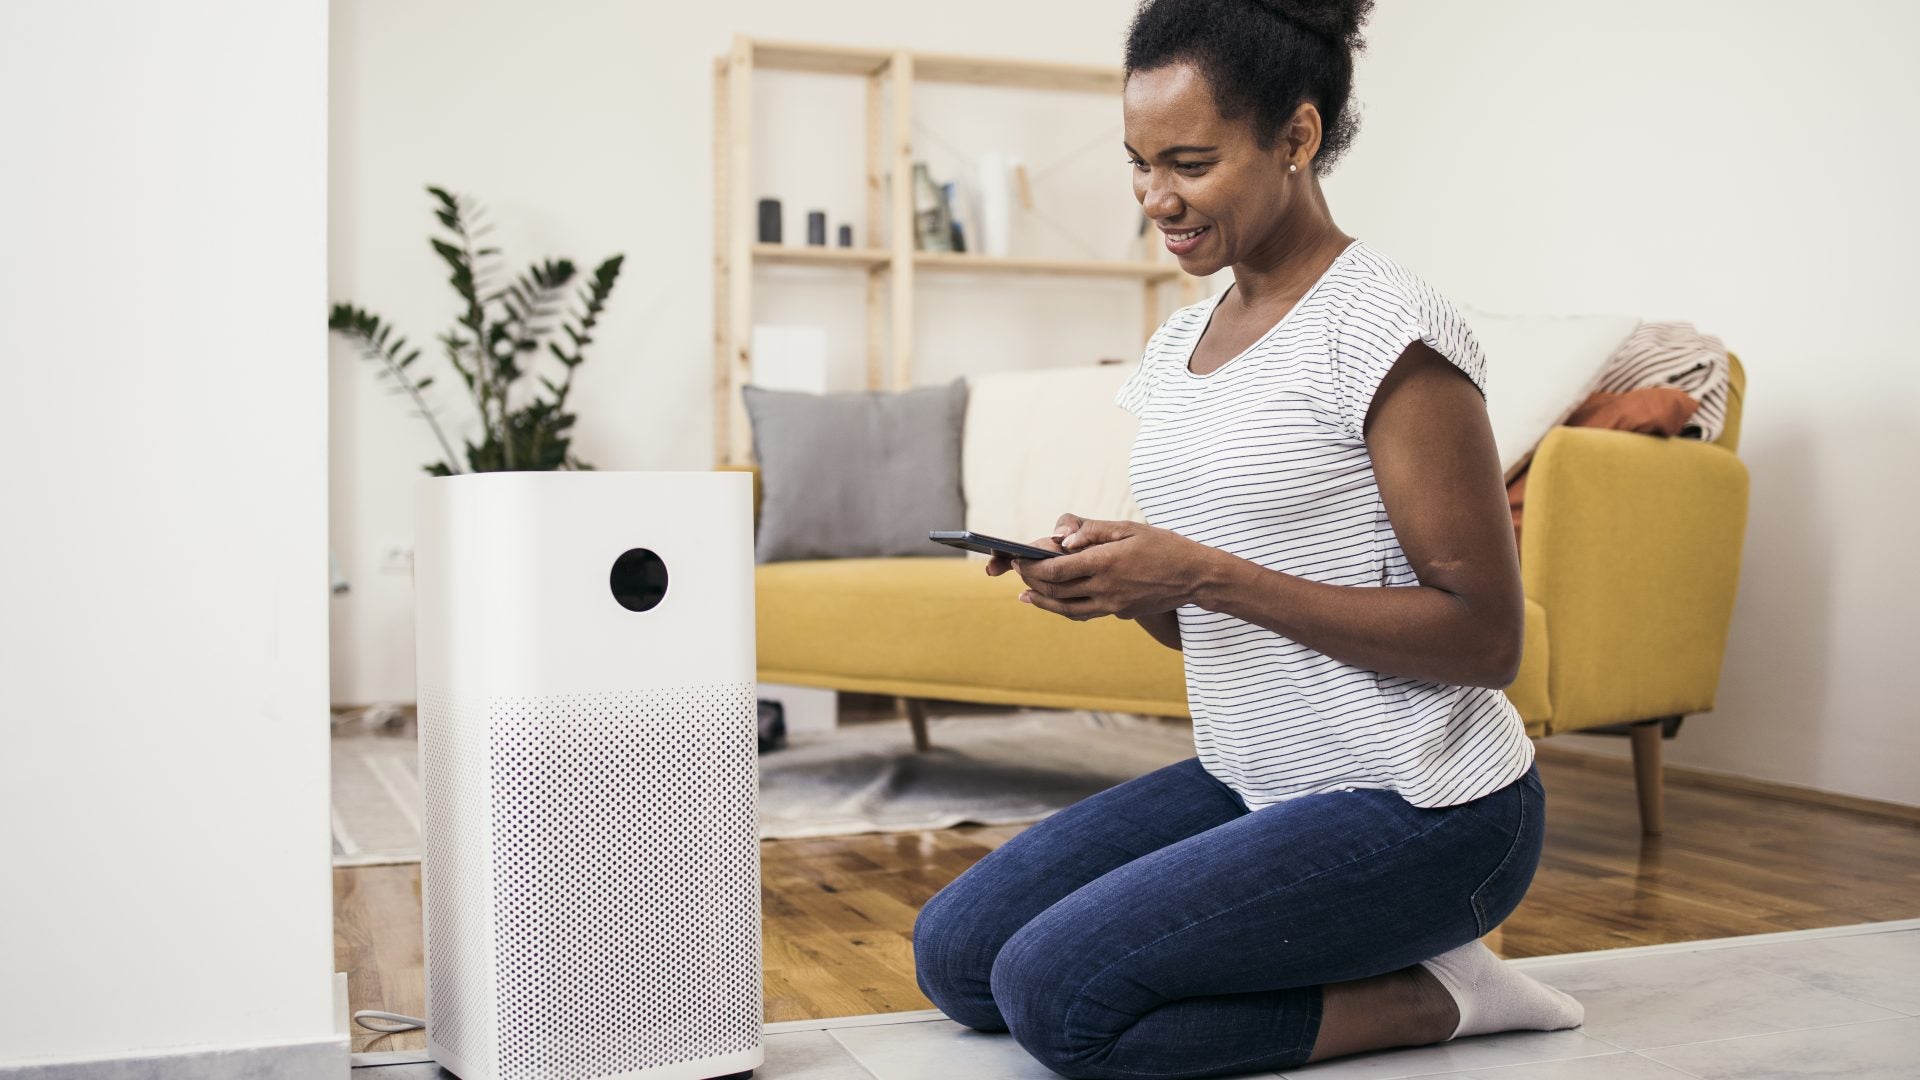 Here Are 5 Of The Best Humidifiers To Purchase This Winter